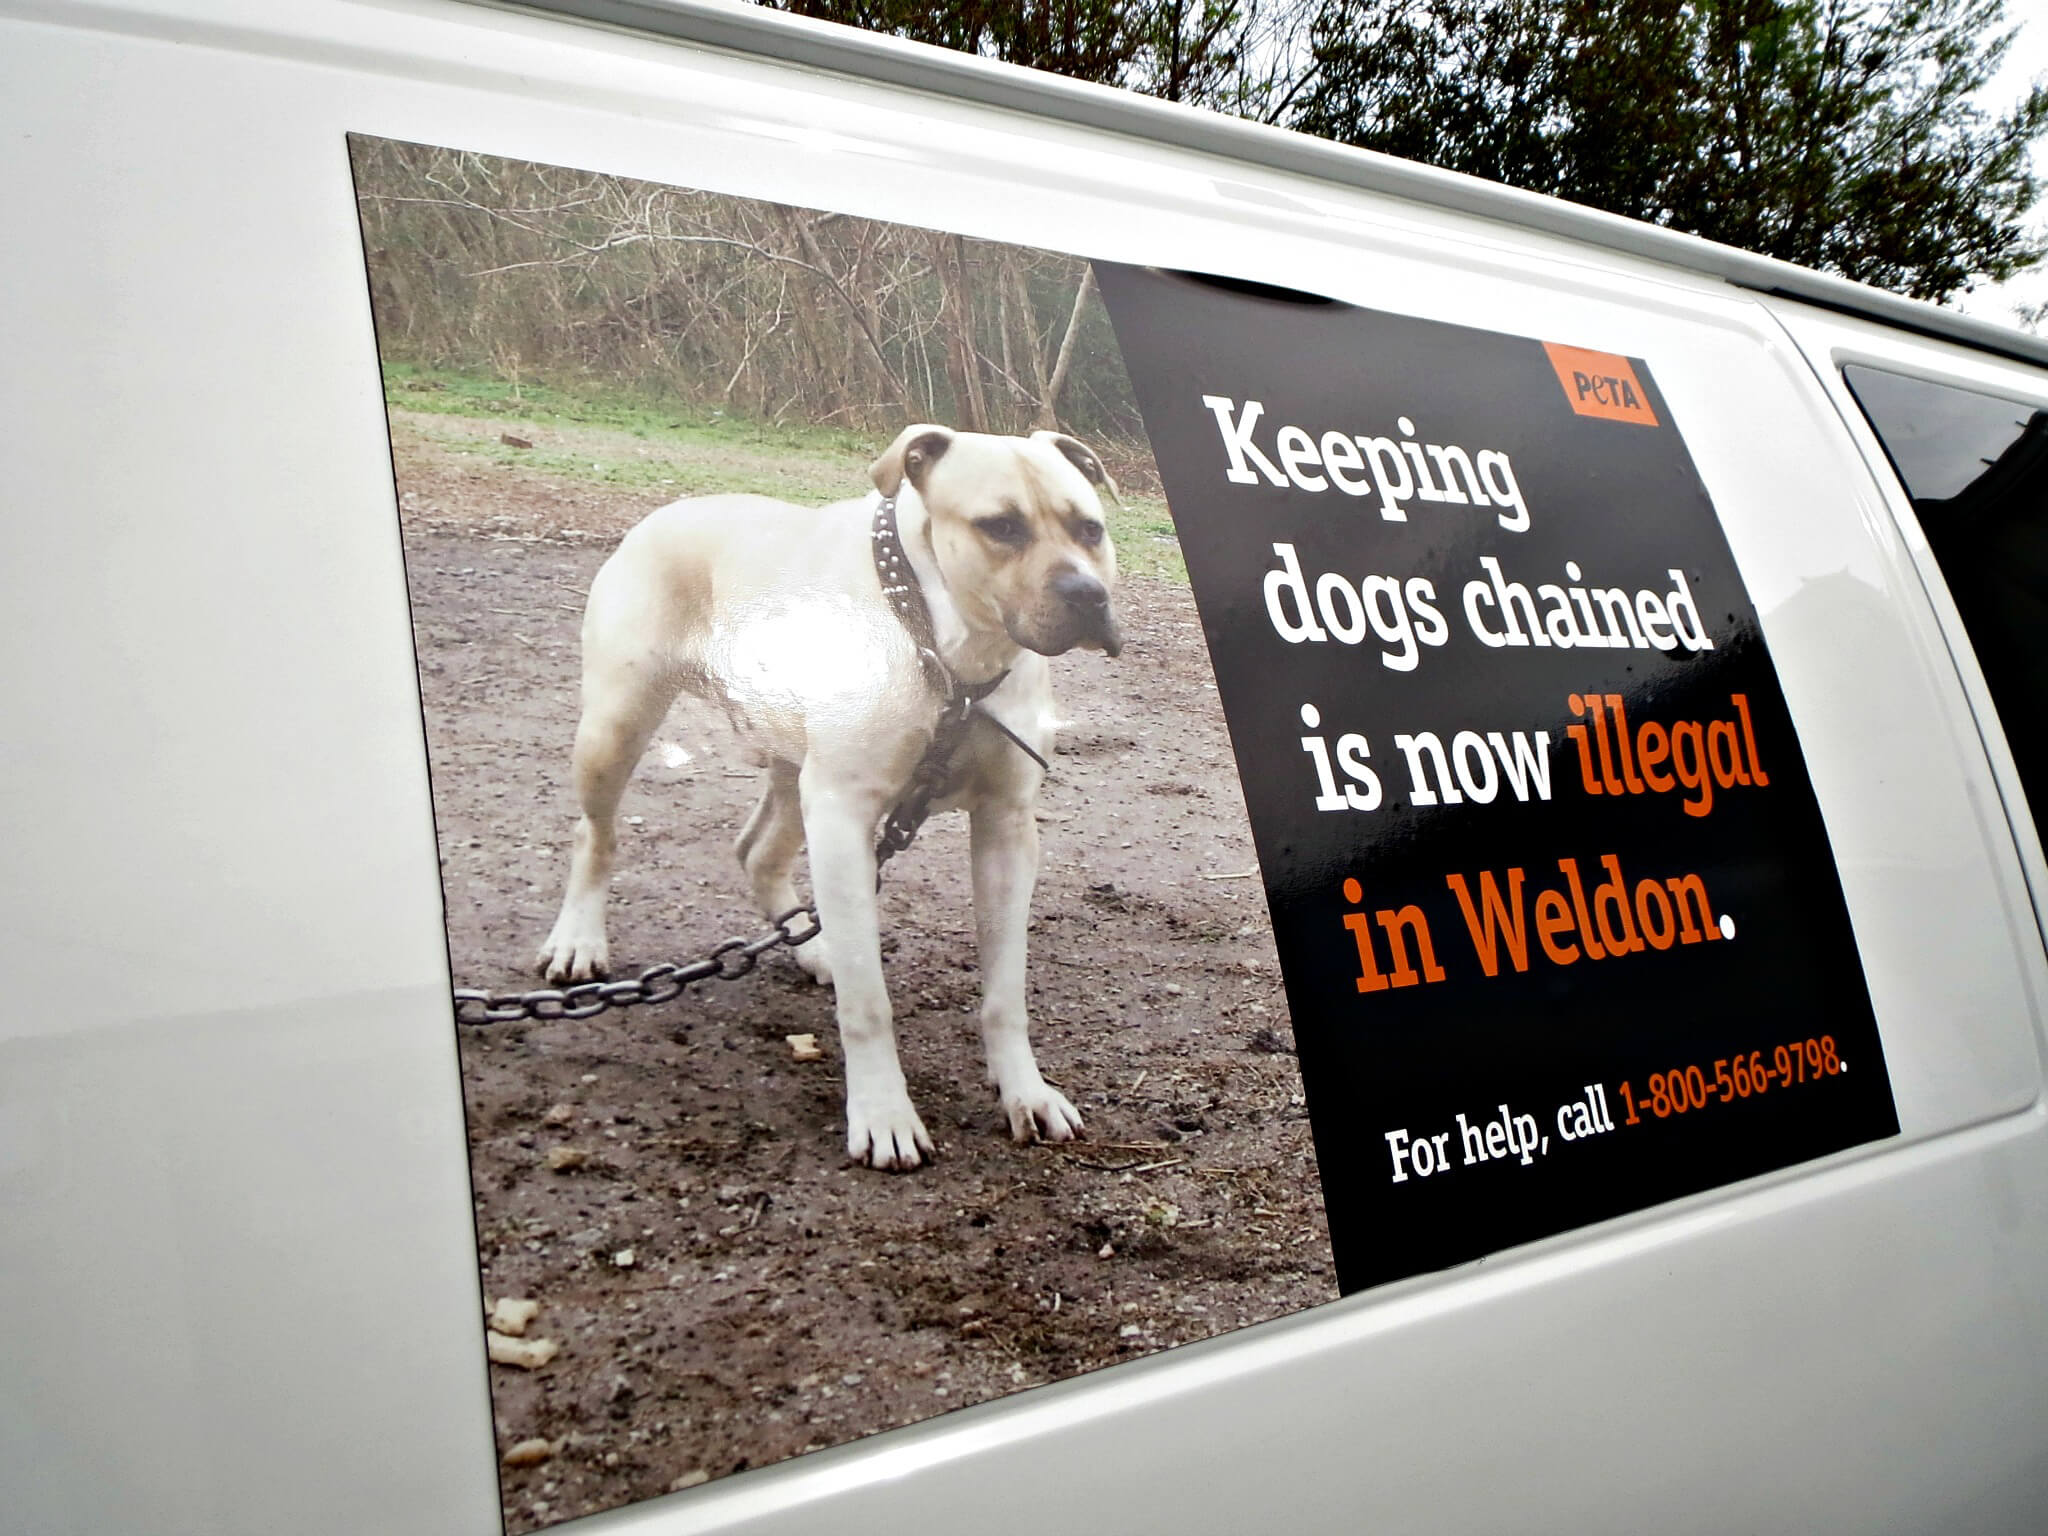 Wheldon Law  Why Are Some Dogs Banned in the UK?